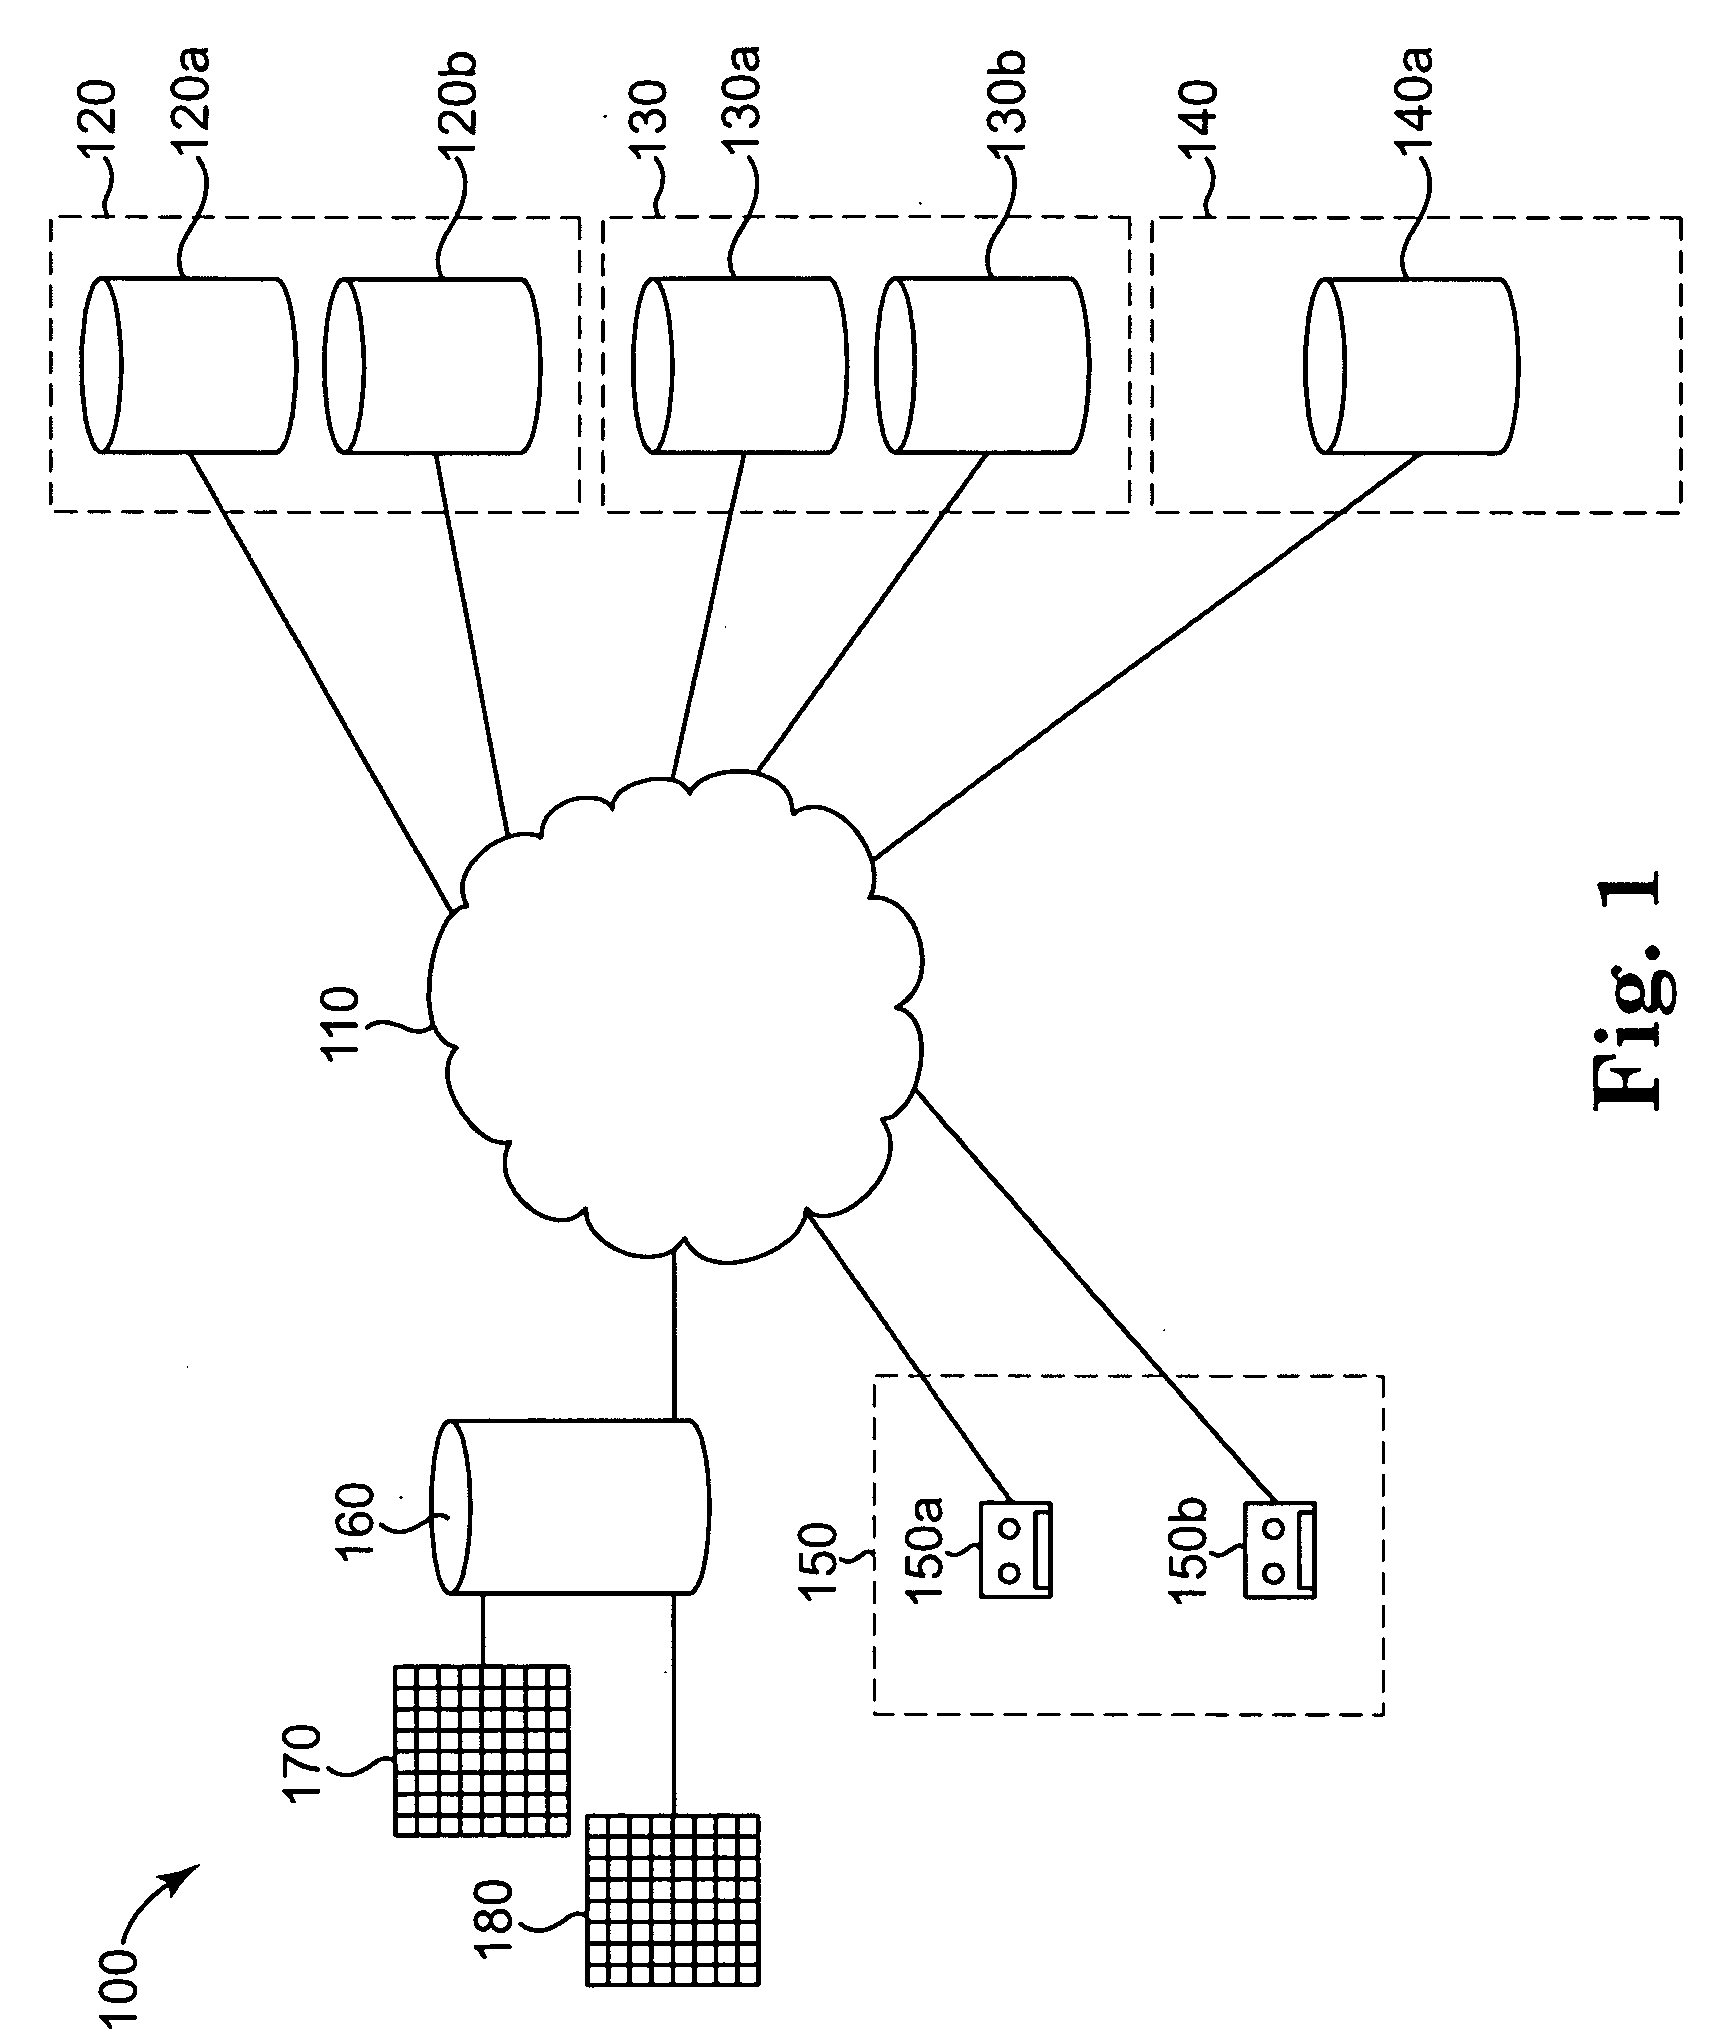 Policy-based sharing of redundant data across storage pools in a deduplicating system